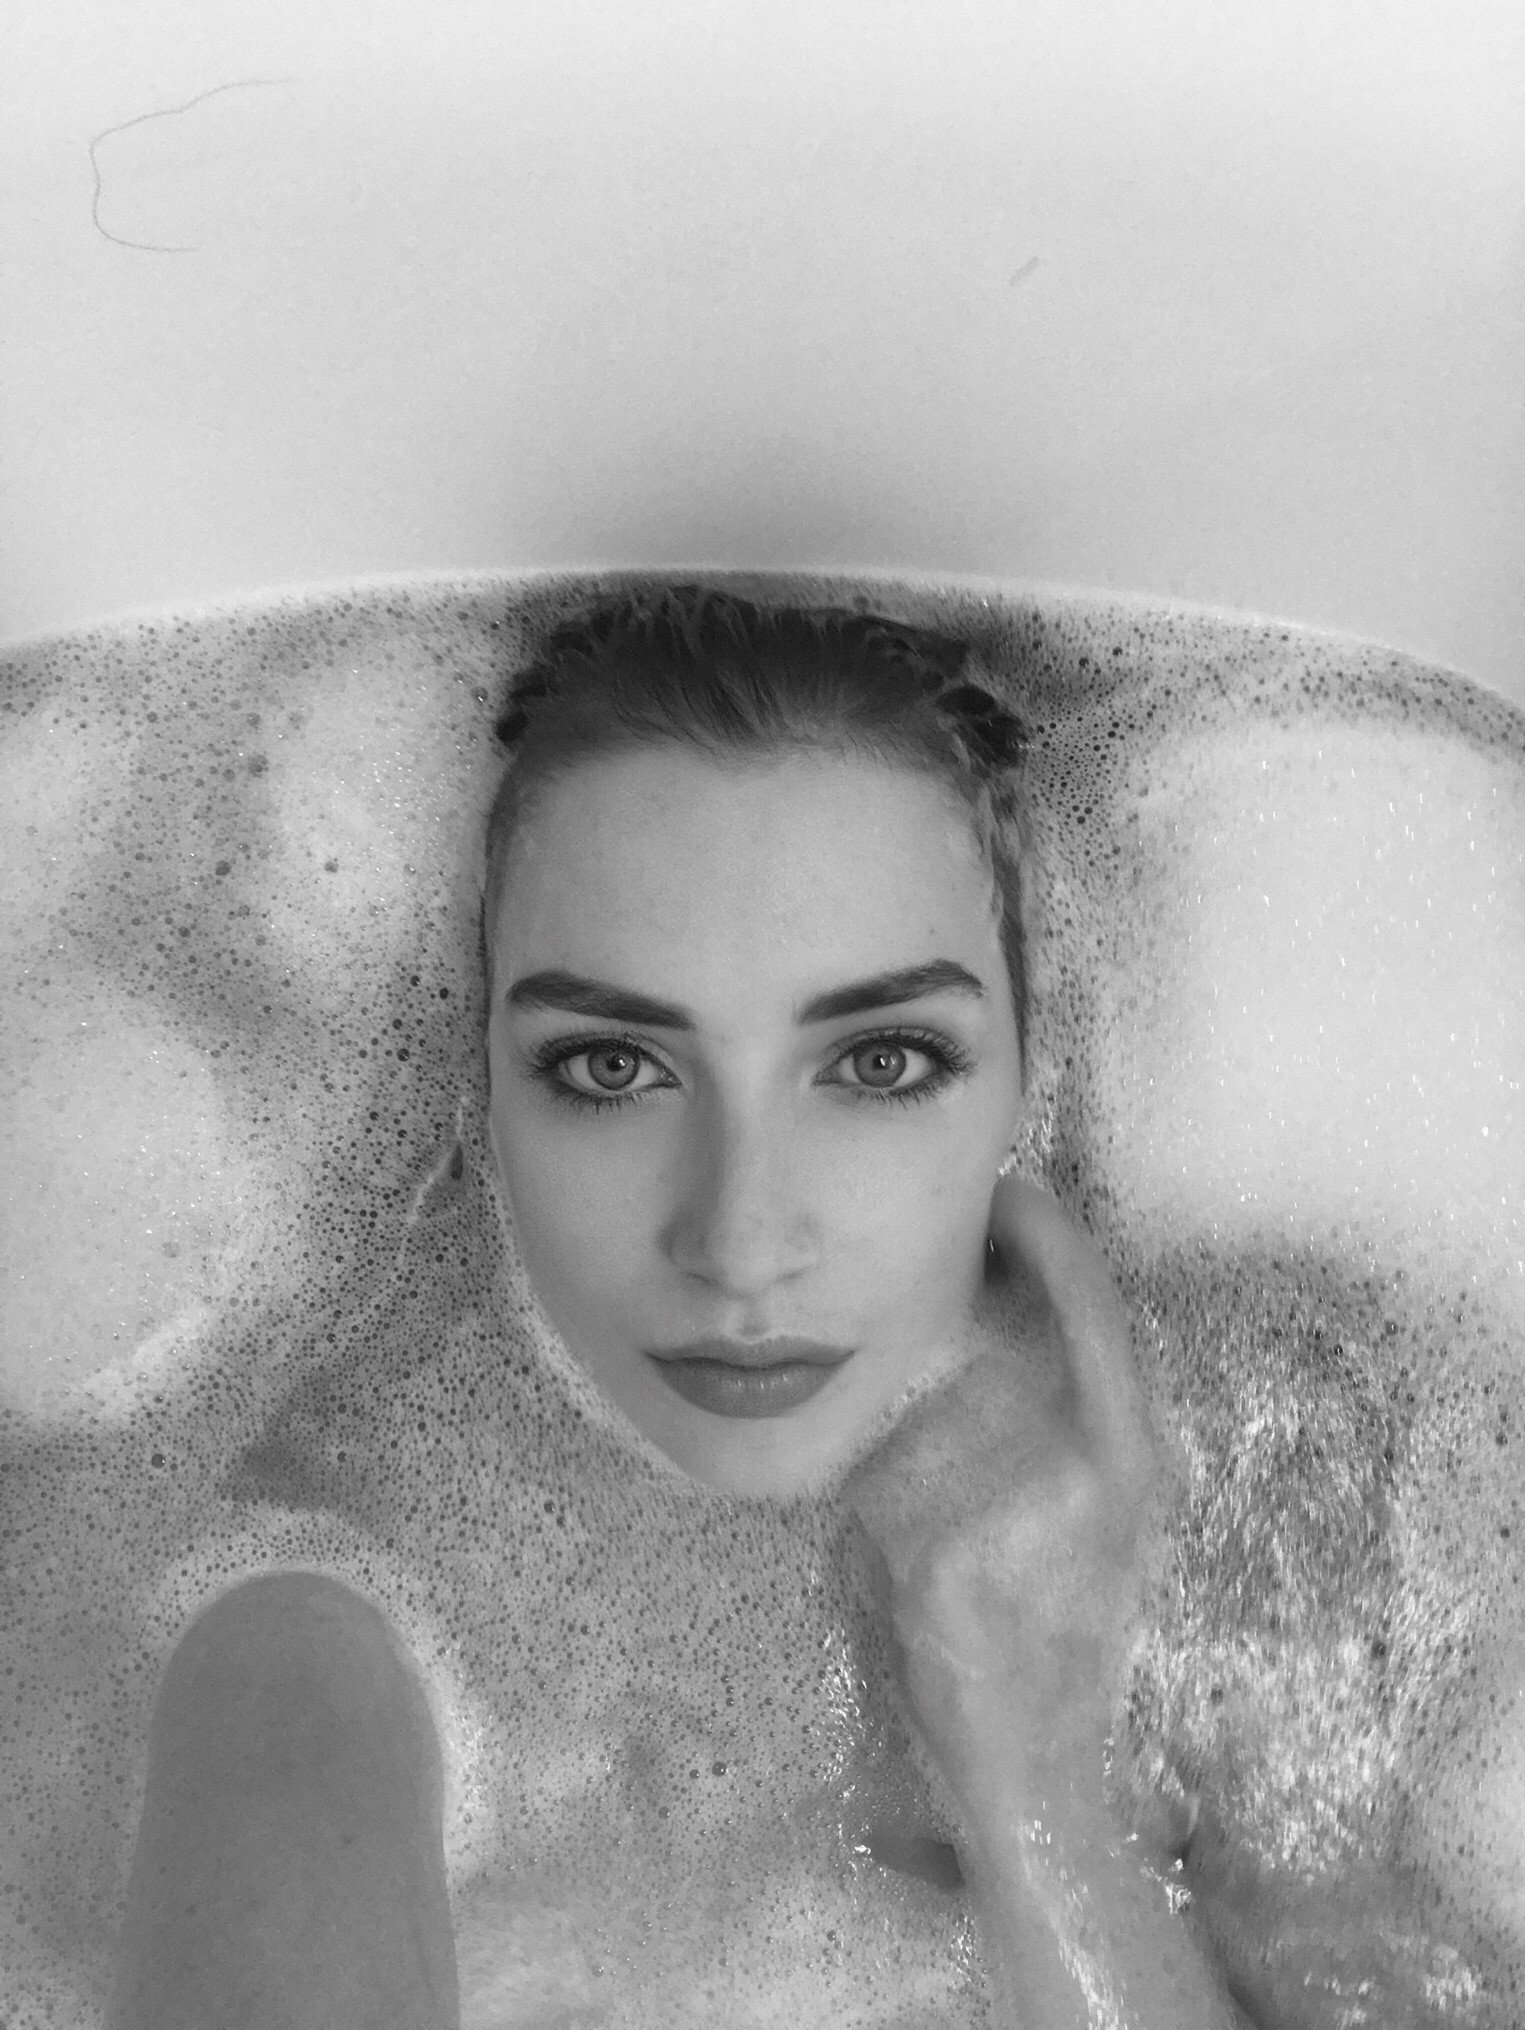 Photo by Elizabeth-xo with the username @Elizabeth-xo,  November 7, 2020 at 11:40 AM. The post is about the topic Bathroom scenes and the text says 'The water feels amazing'